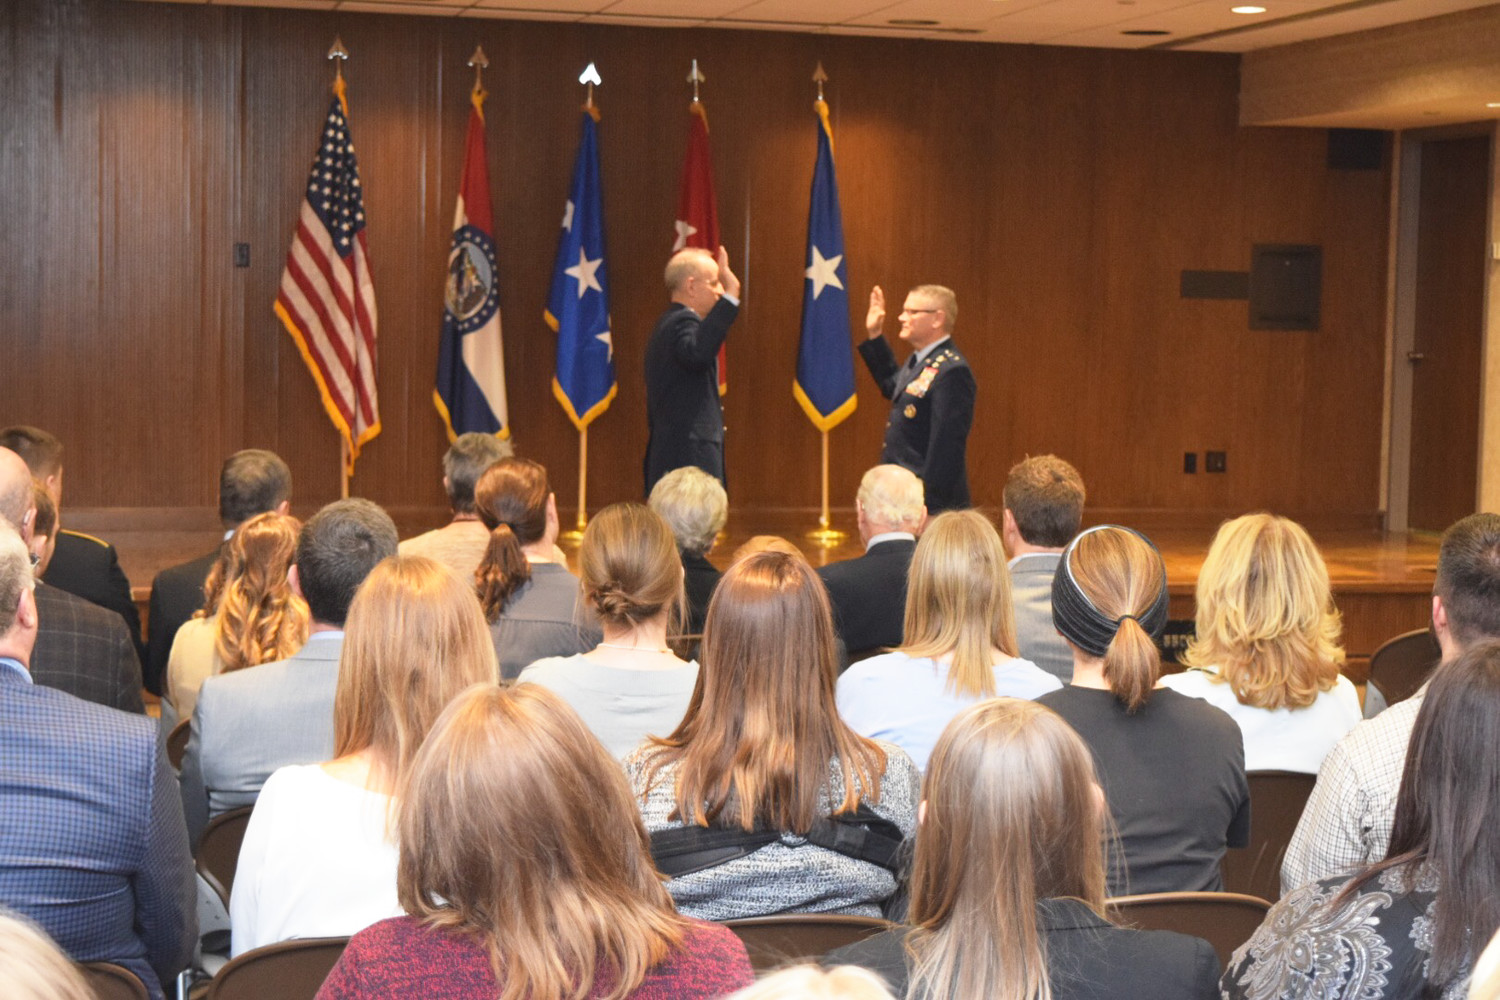 Health Hero
CoxHealth emergency physician Jerry Fenwick is promoted Jan. 17 to major general in the U.S. Air Force, becoming one of four with the title in the Air Force Medical Service. Air Force Surgeon Gen. Mark Ediger came to Cox South from Washington, D.C., to perform the ceremony.